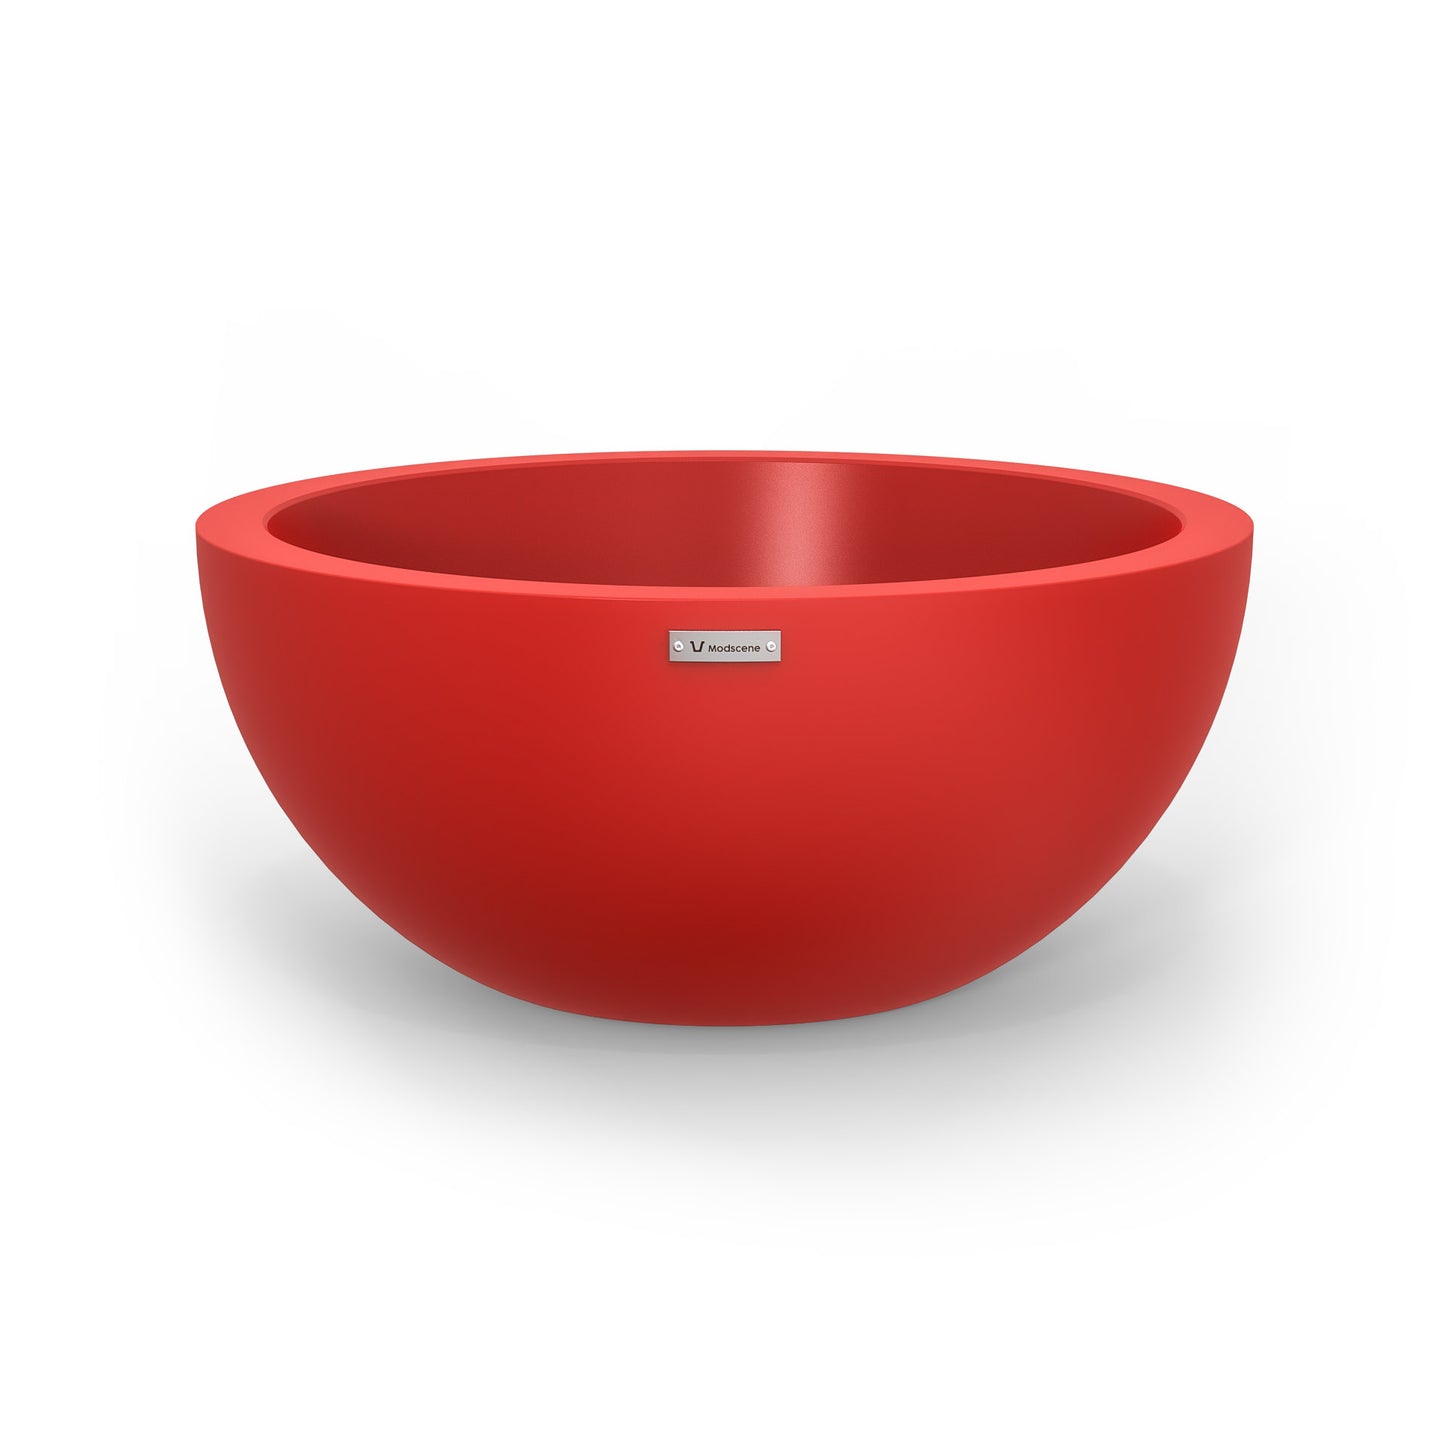 A large red planter bowl made by Modscene. Australian planters.